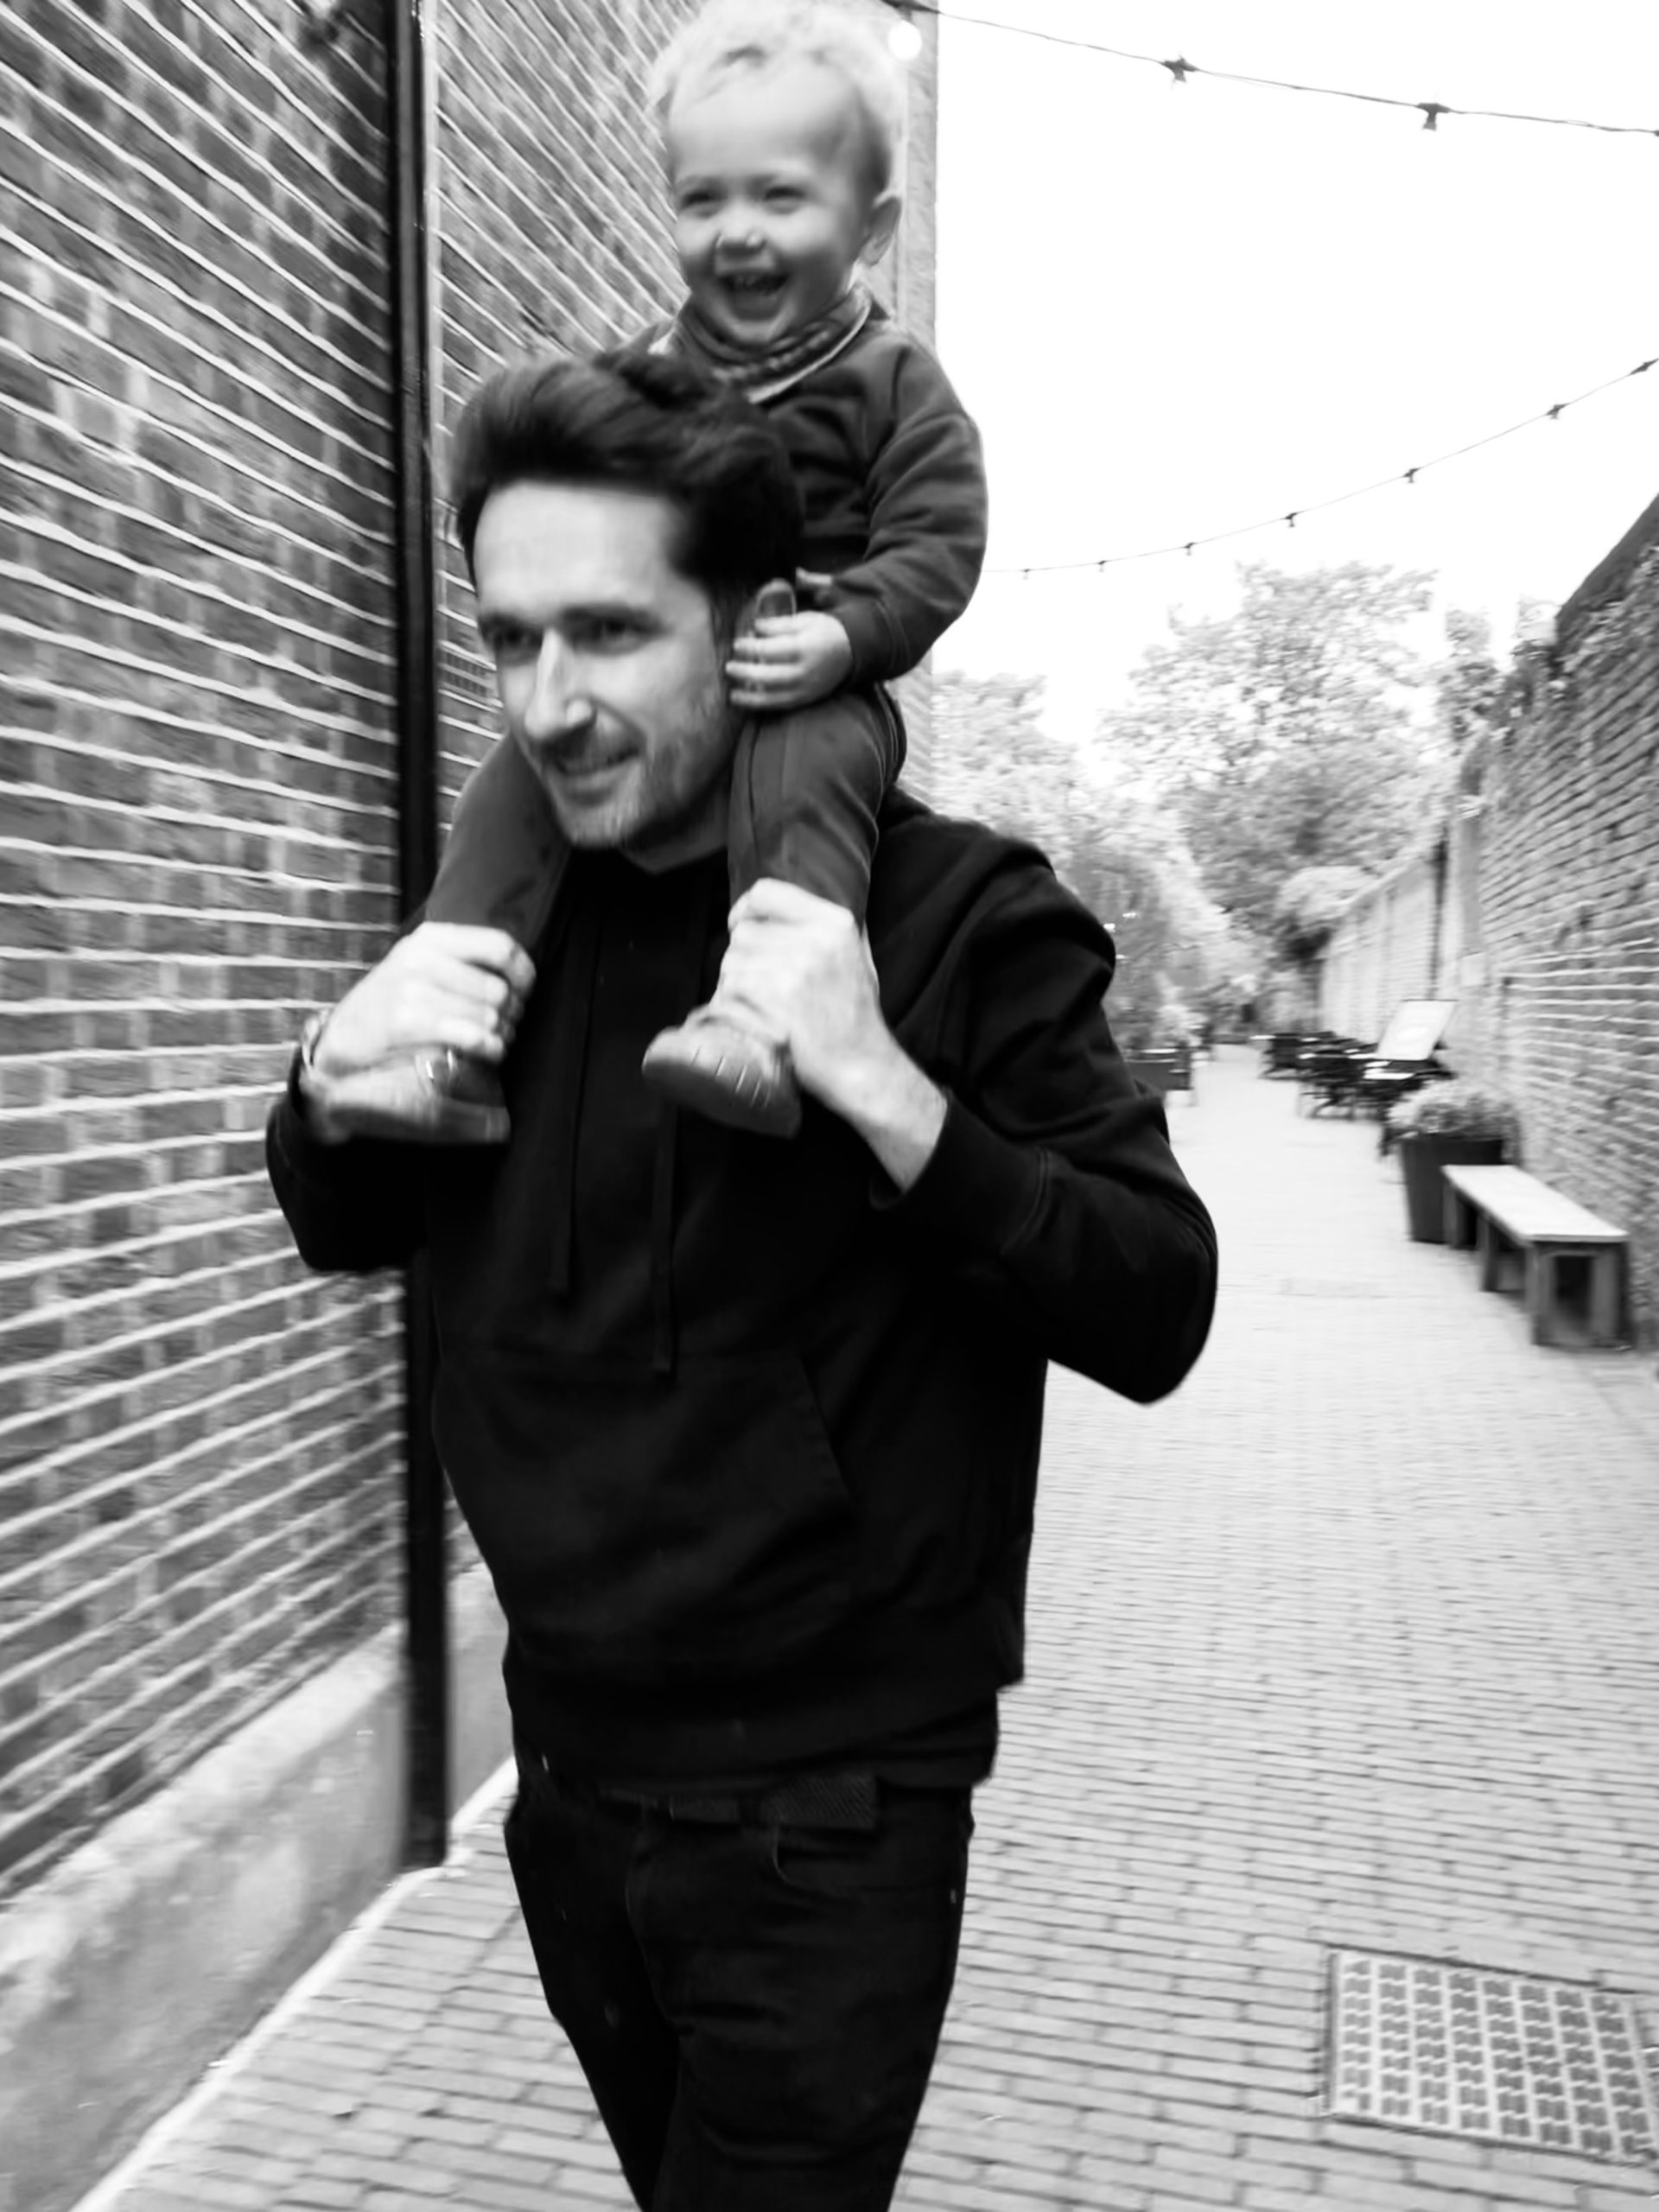 Image of 30SIX founder James with his son on his shoulders